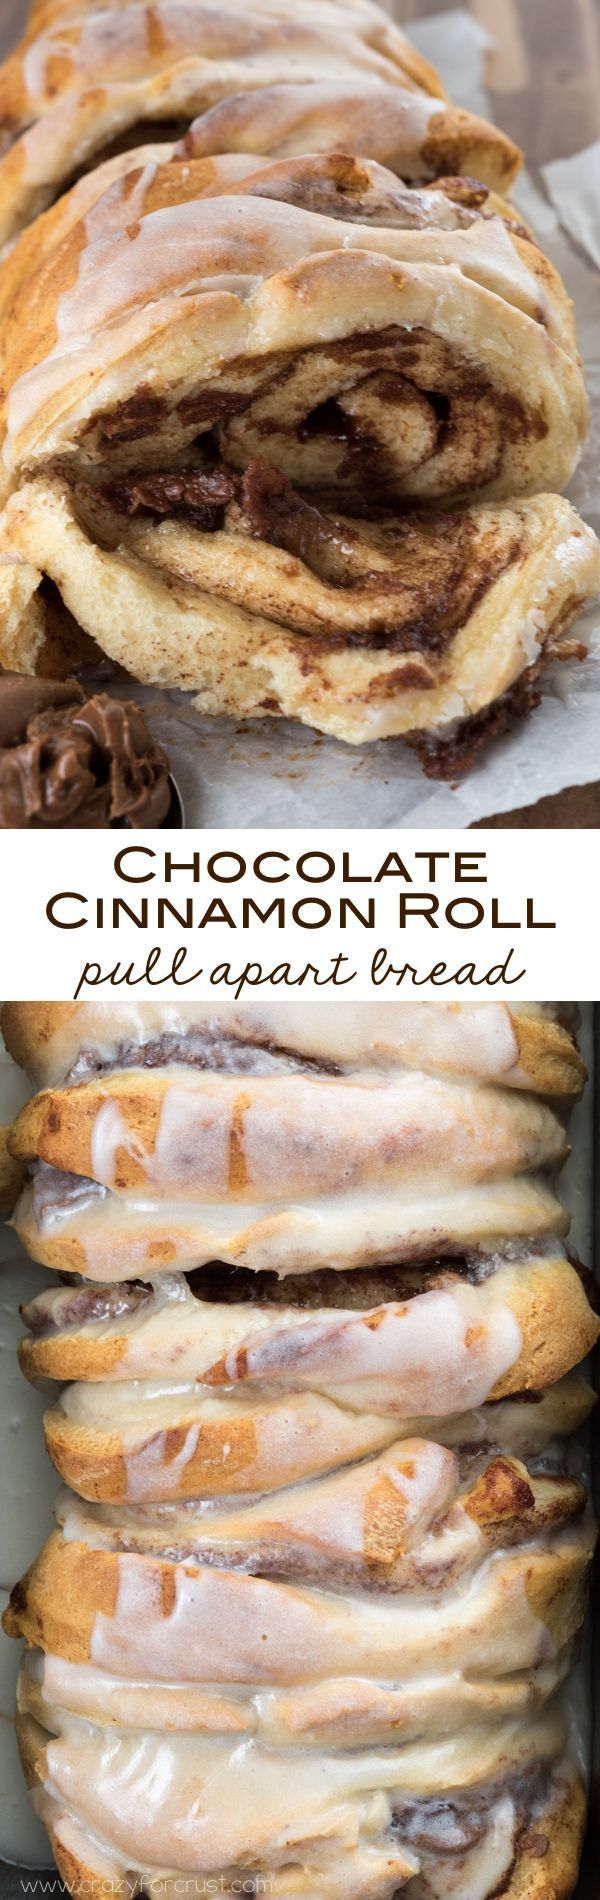 Chocolate Cinnamon Roll Pull Apart Bread with only 2 ingredients! An easy breakfast recipe on the table in